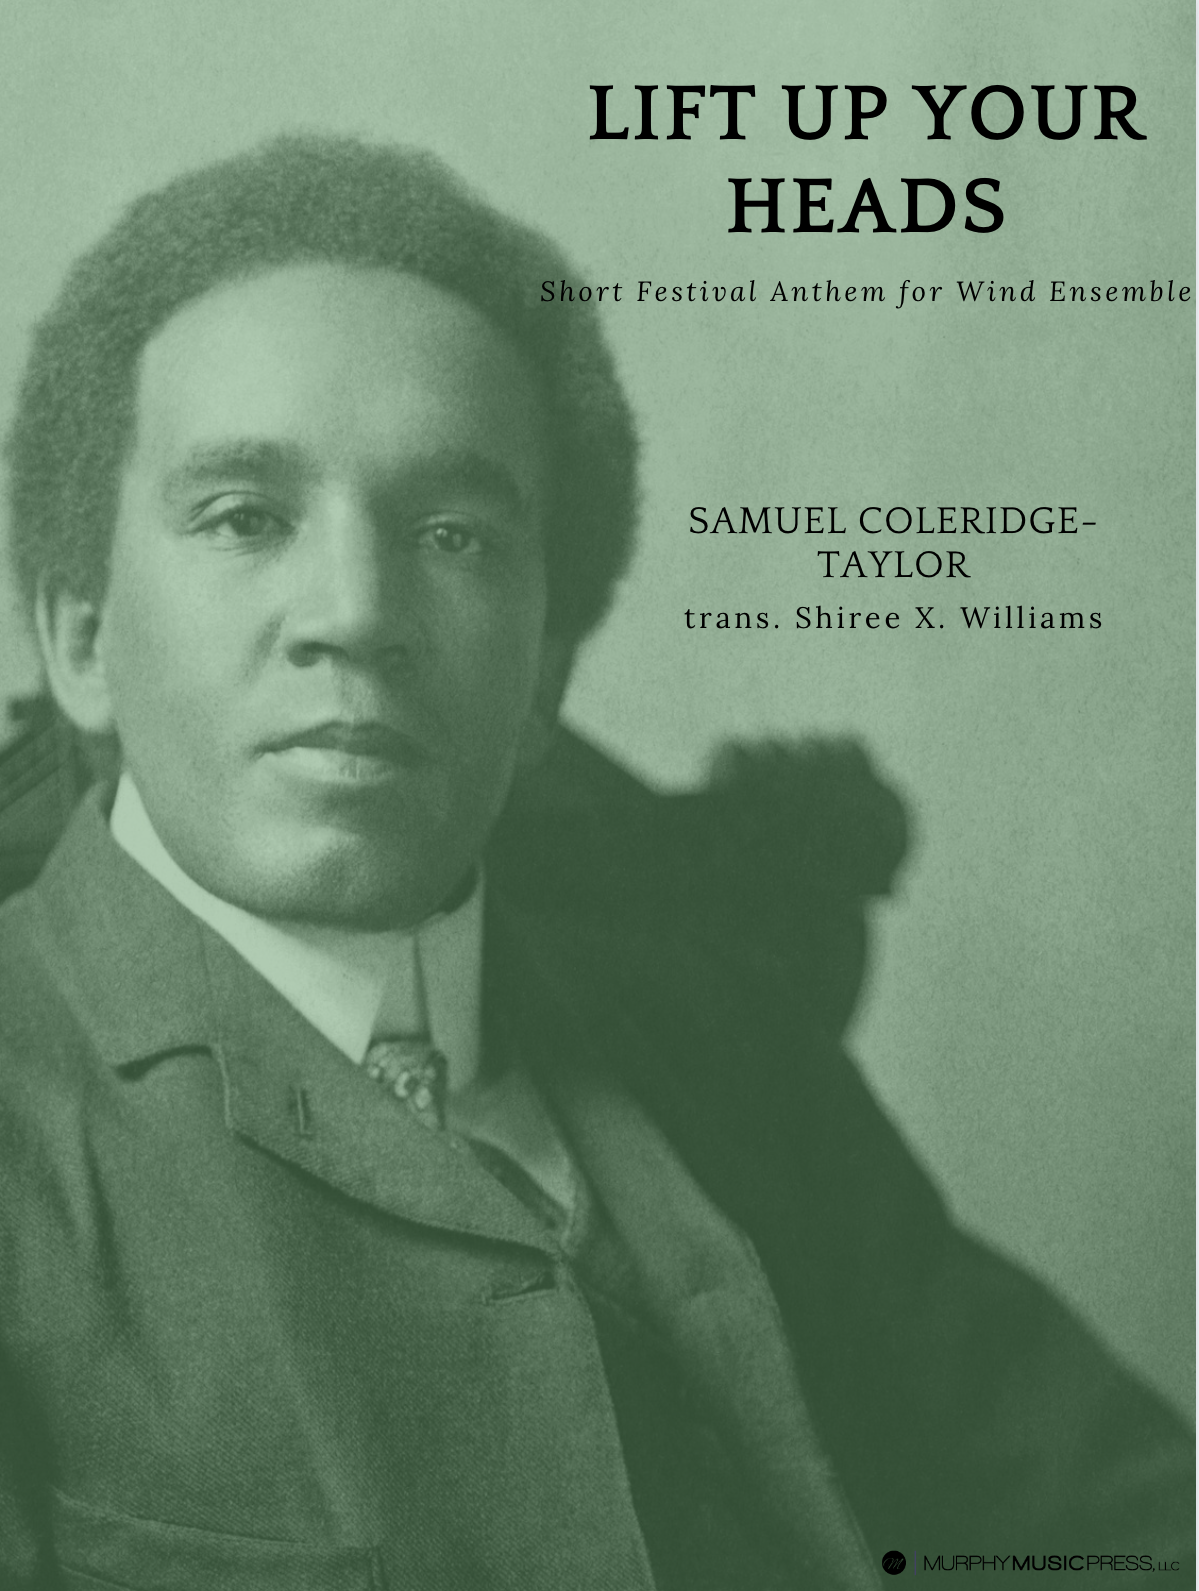 Lift Up Your Heads by Samuel Coleridge-Taylor, arr. Shiree X. Williams